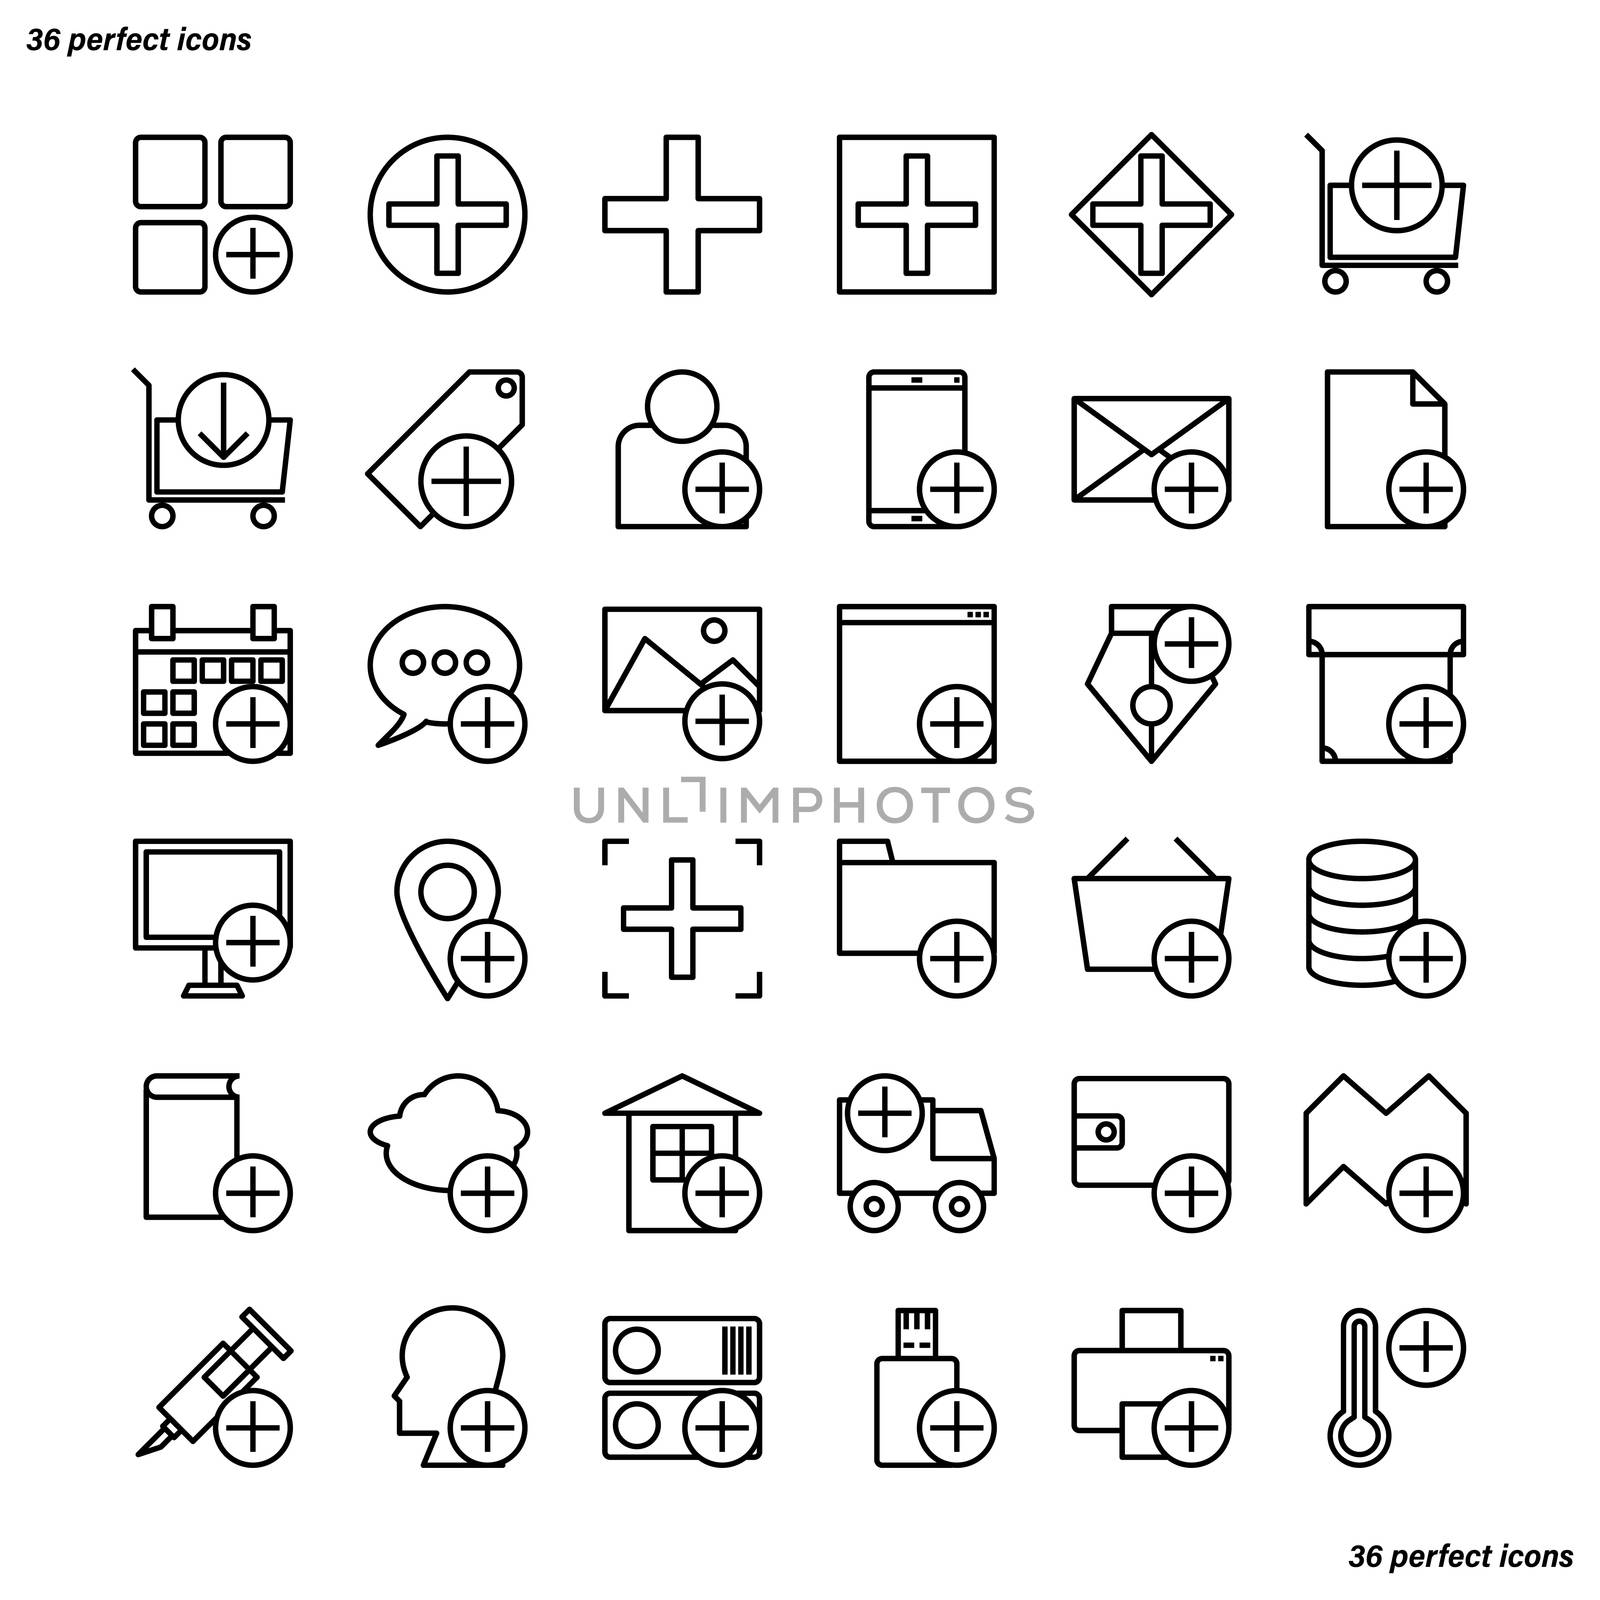 Add Outline Icons perfect pixel. Use for website, template,package, platform. Concept business object design.